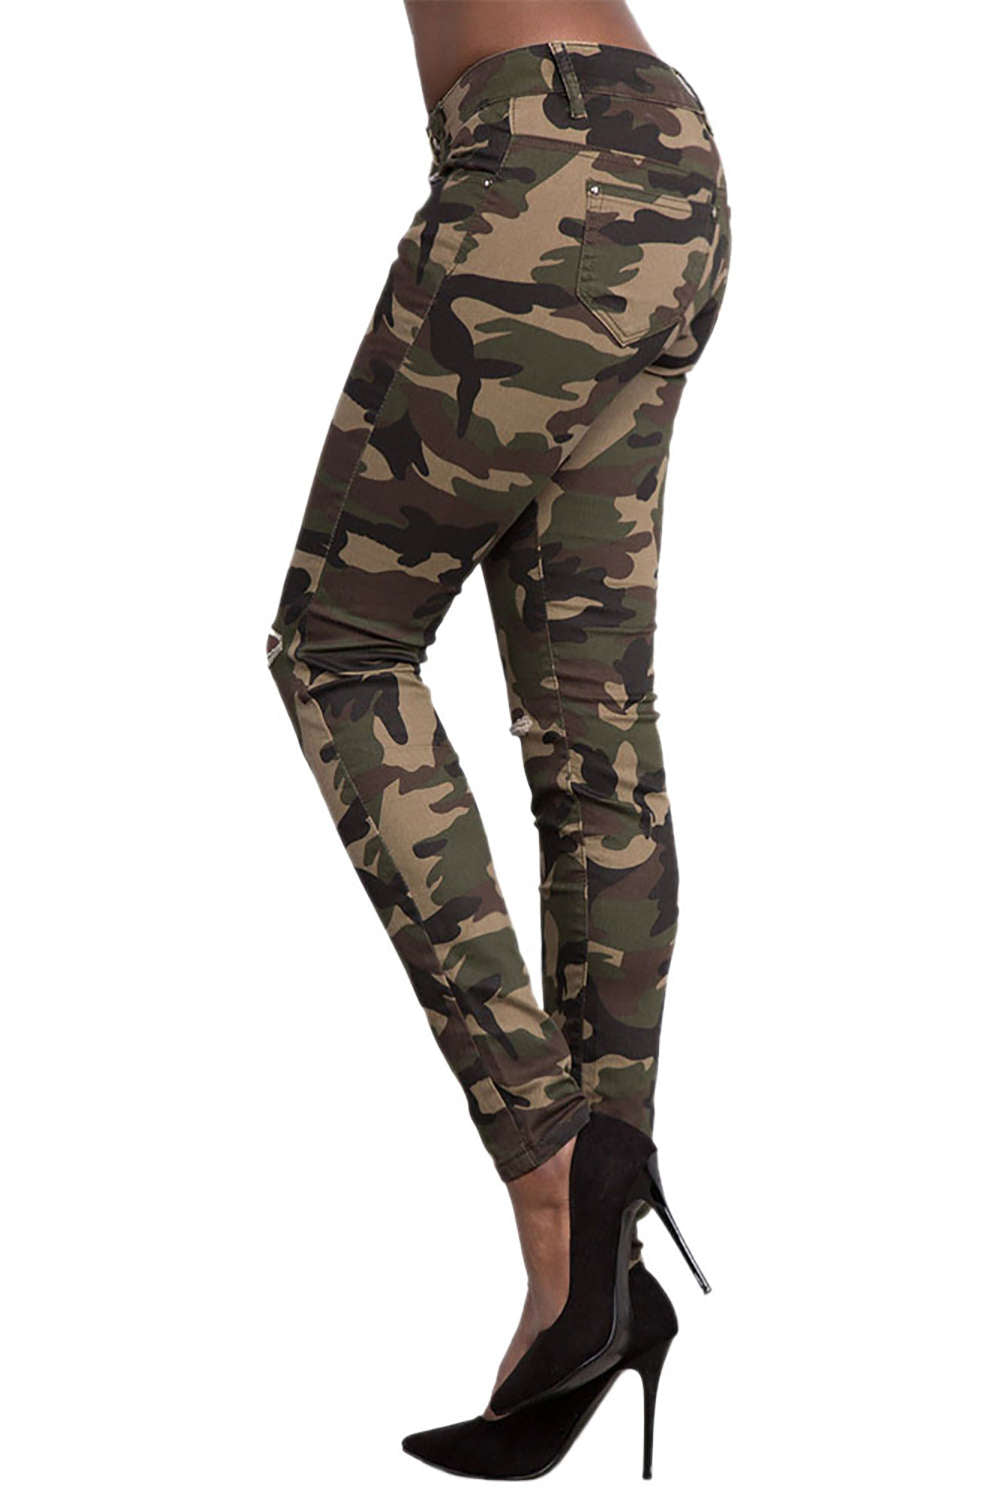 Iyasson Women's Knee Ripped Hole Camouflage Jeans